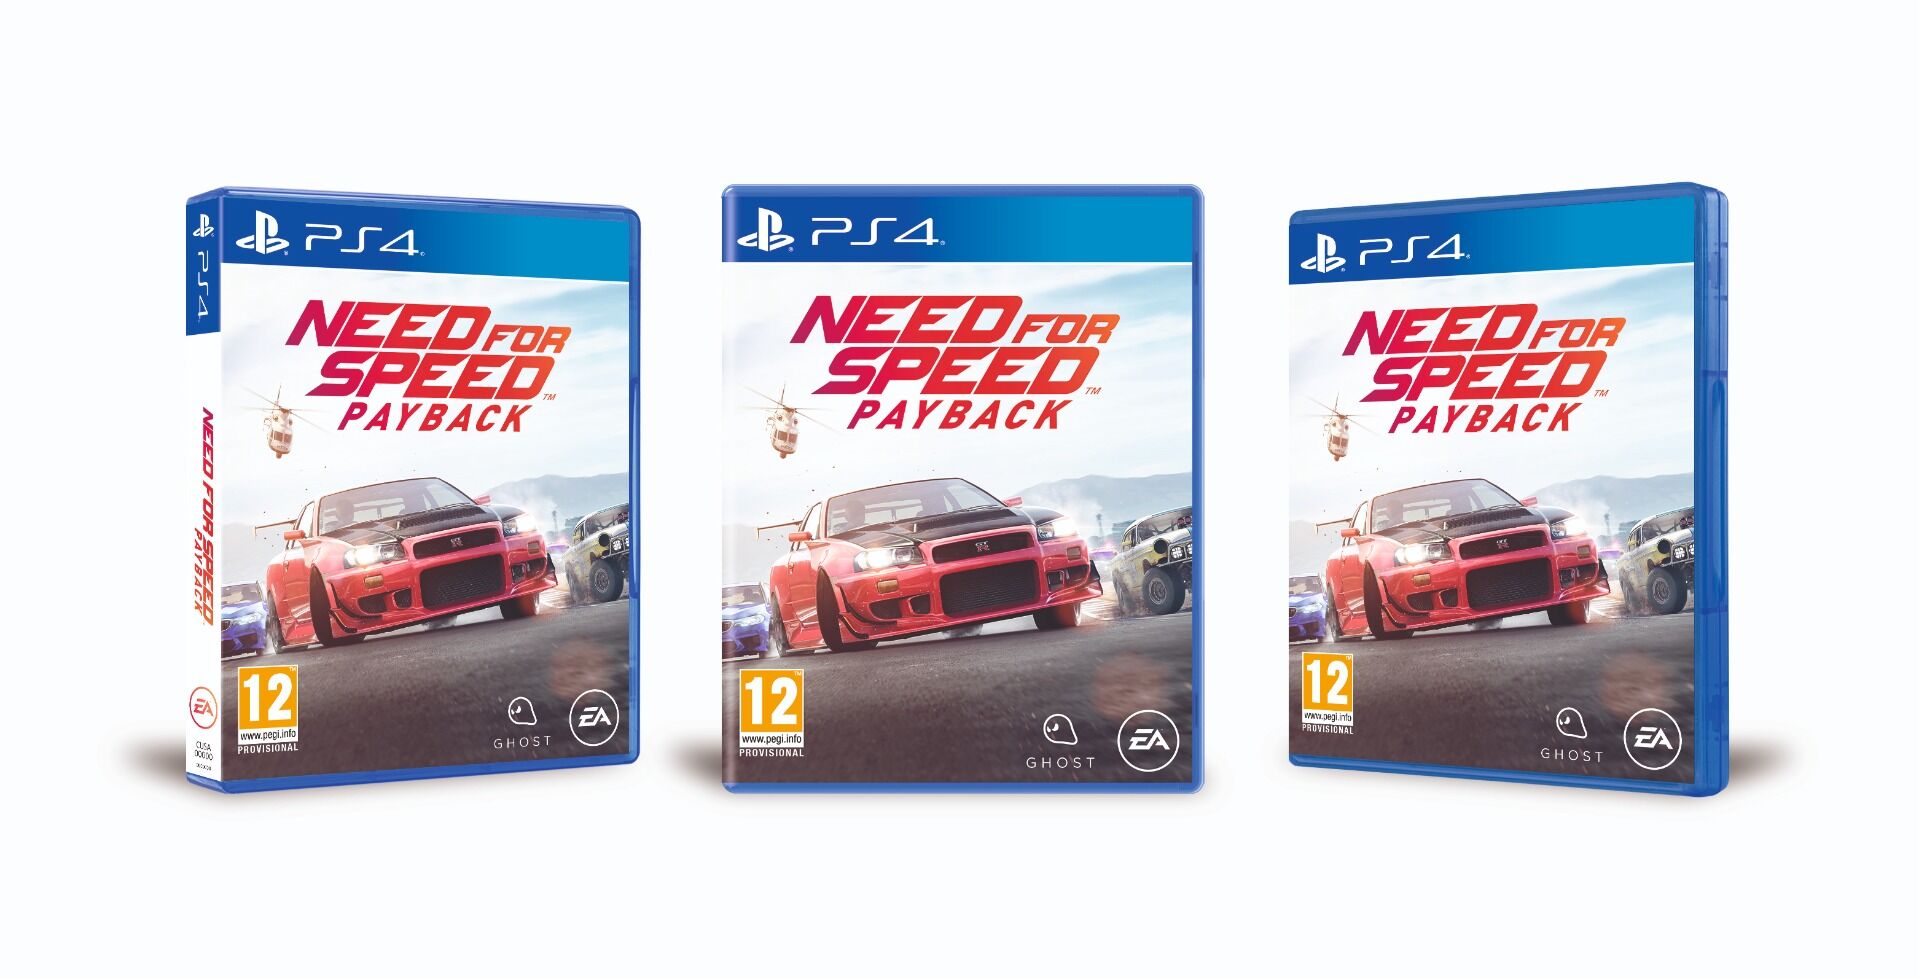 Need for Speed ps4 диск. Need for Speed Payback ps4 диск. Need for Speed Payback пс4.